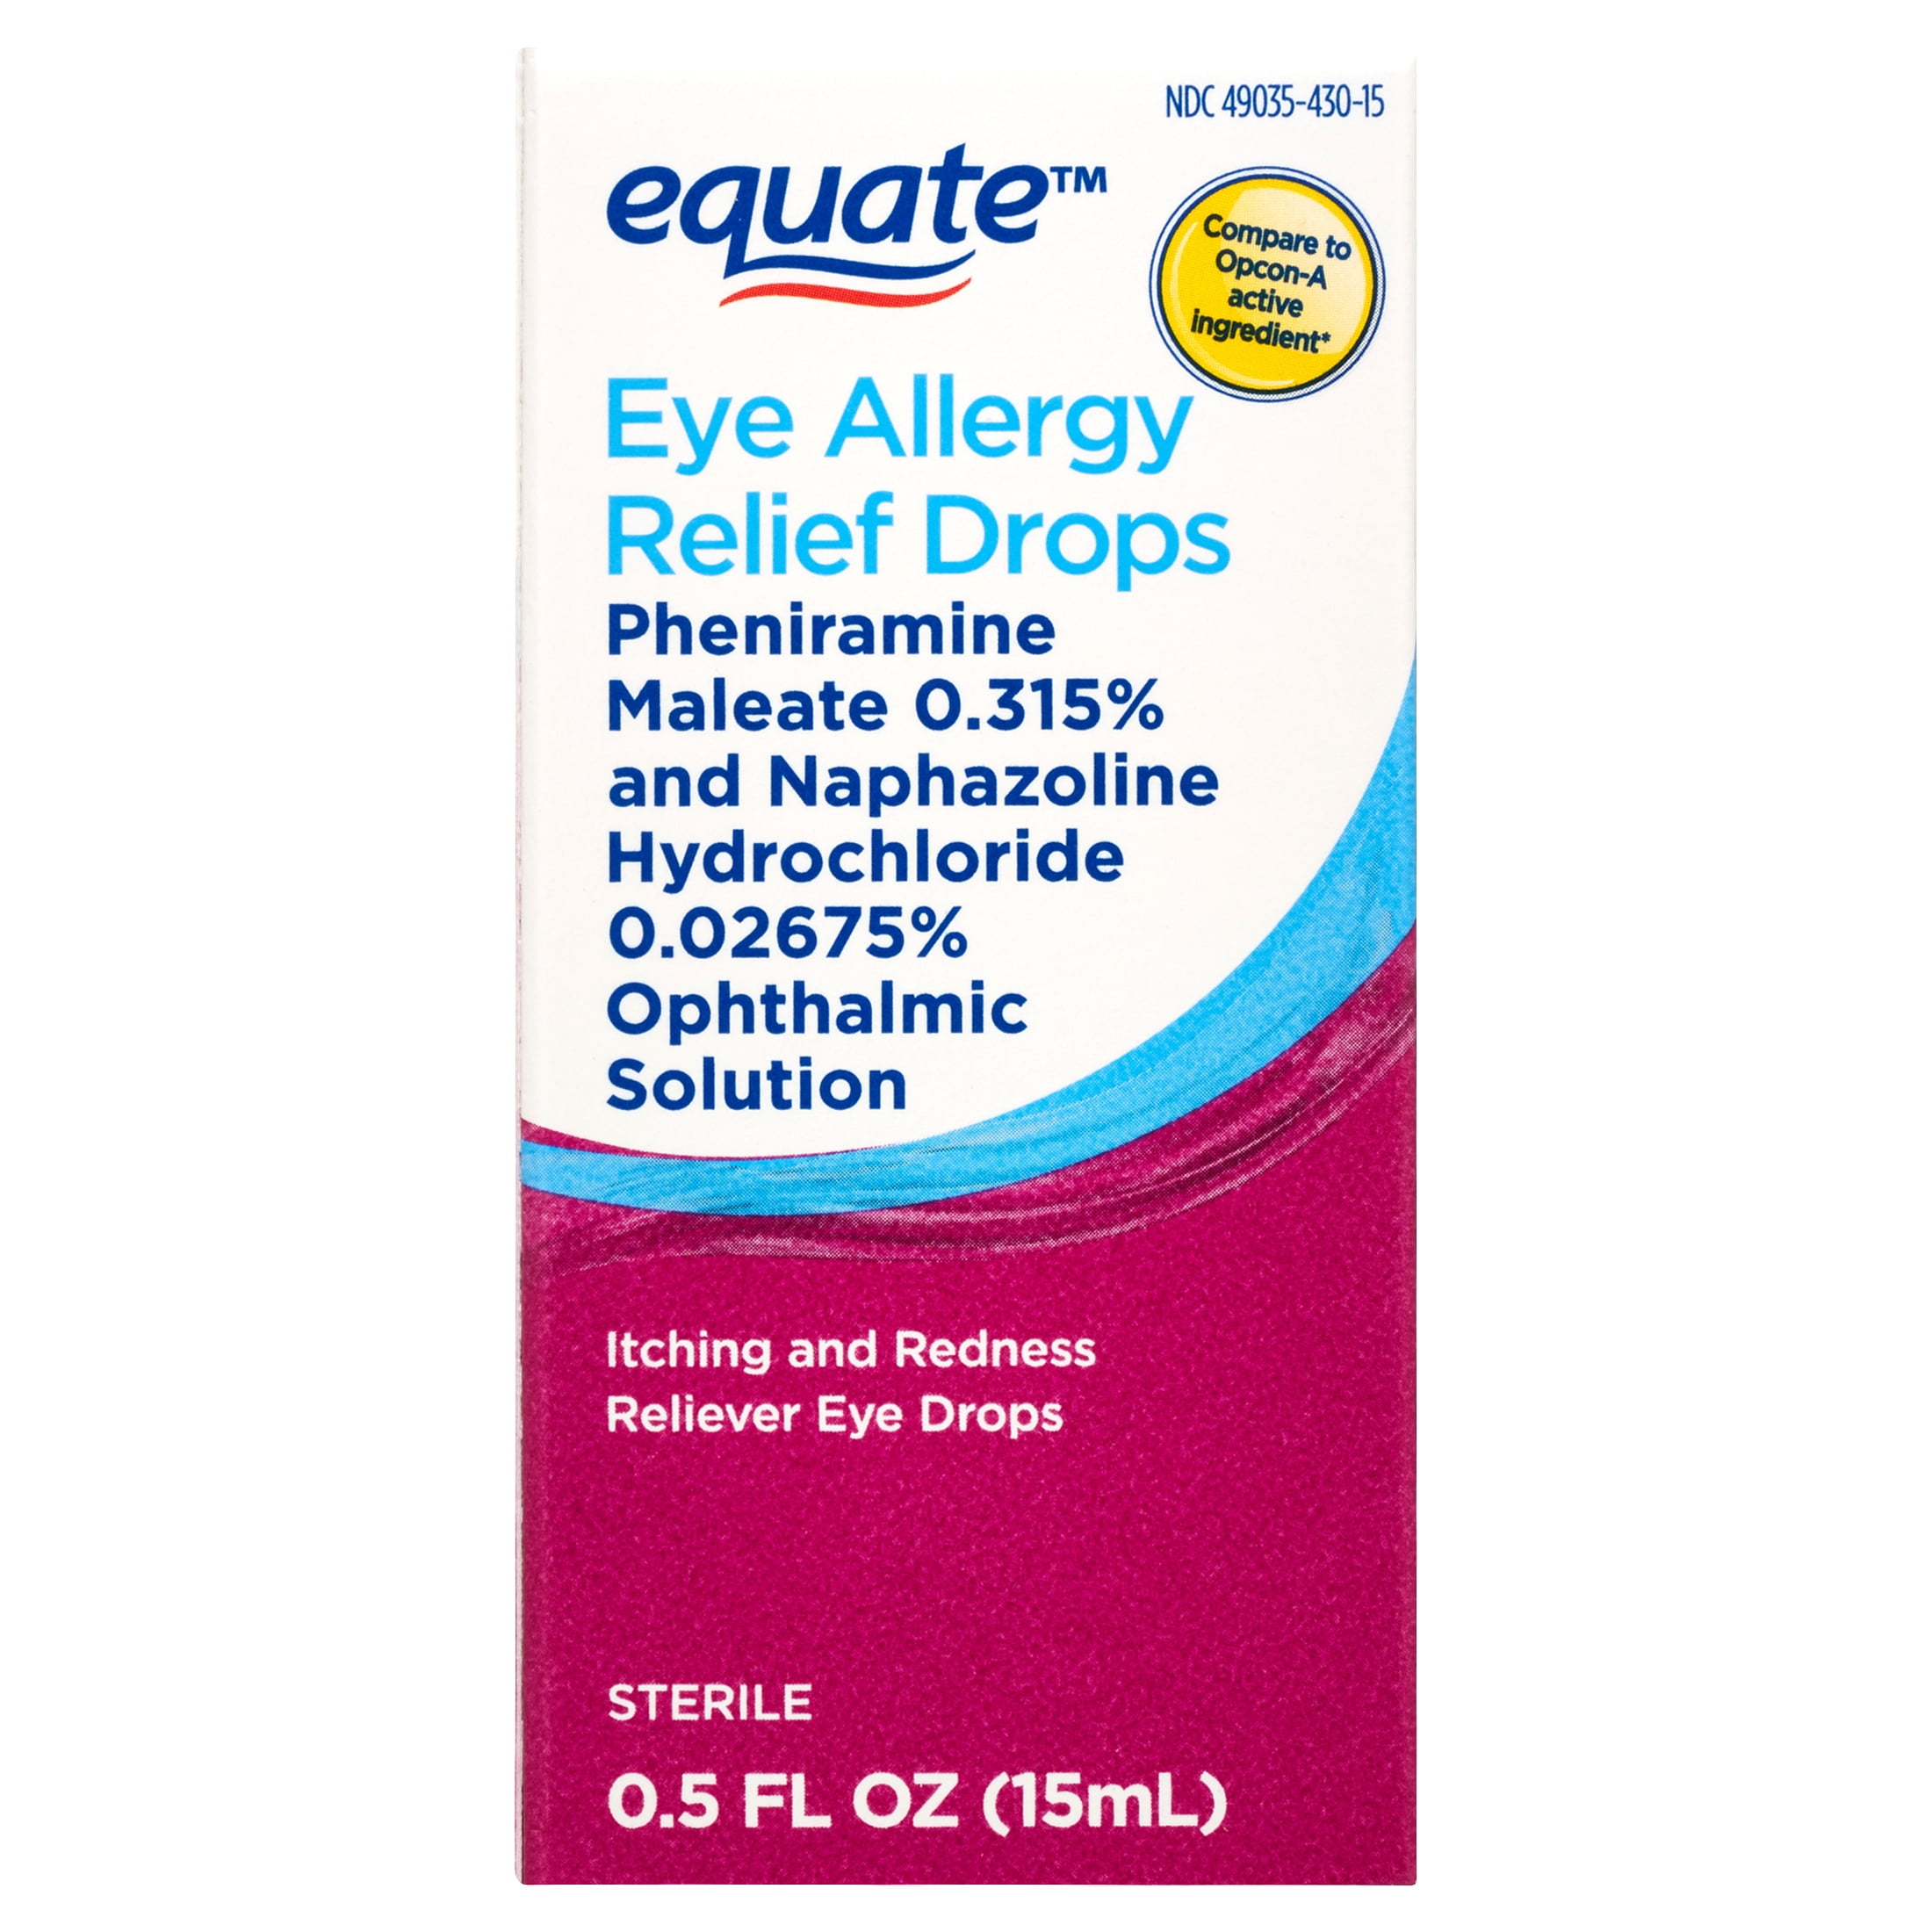 Equate Eye Allergy Relief Antihistamine and Redness Reliever Eye Drops